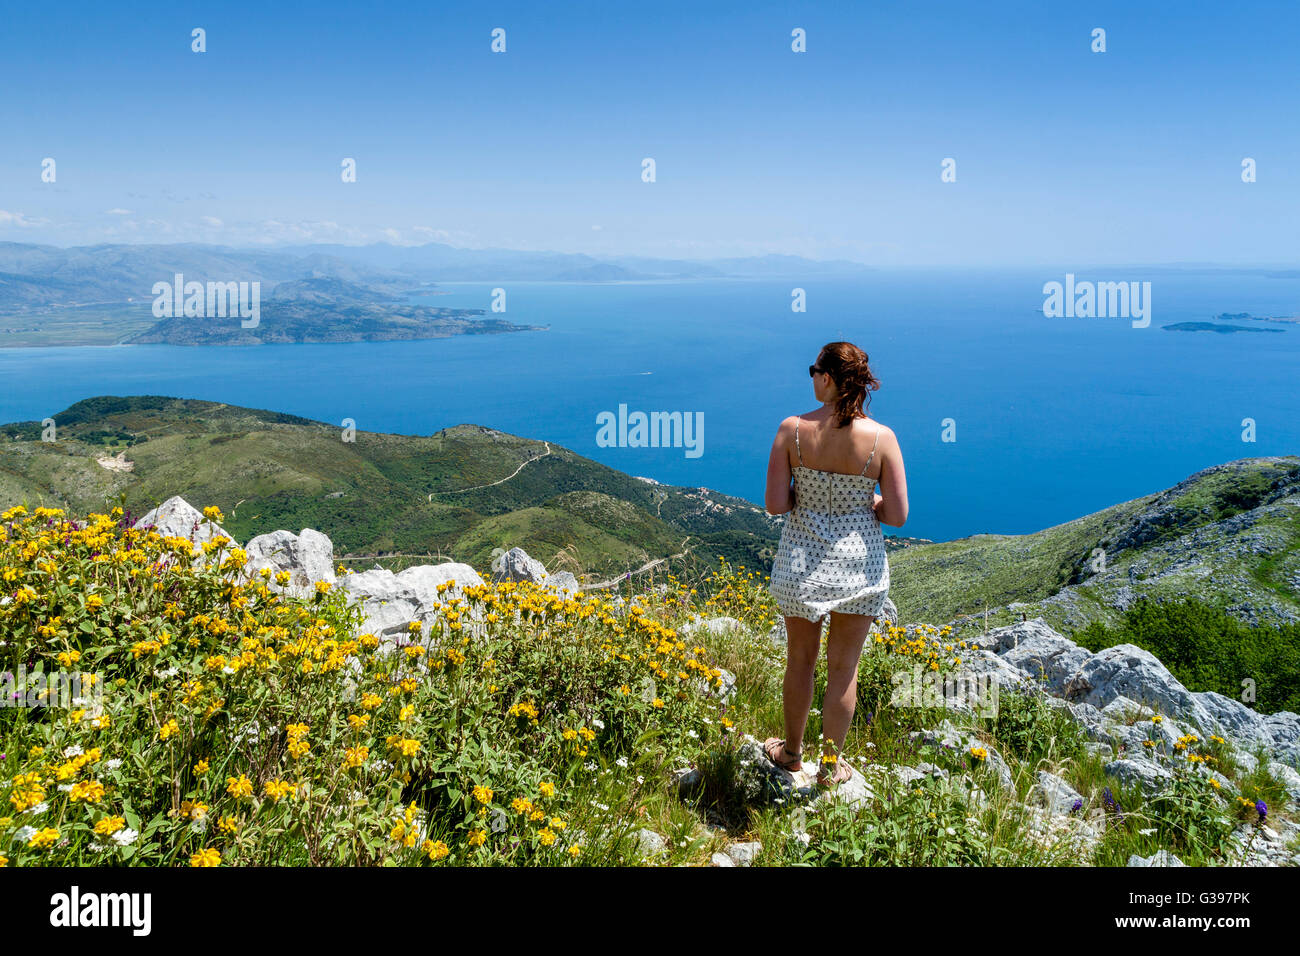 A Young Woman Looking At The Views From Mount Pantokrator, Corfu Island, Greece Stock Photo